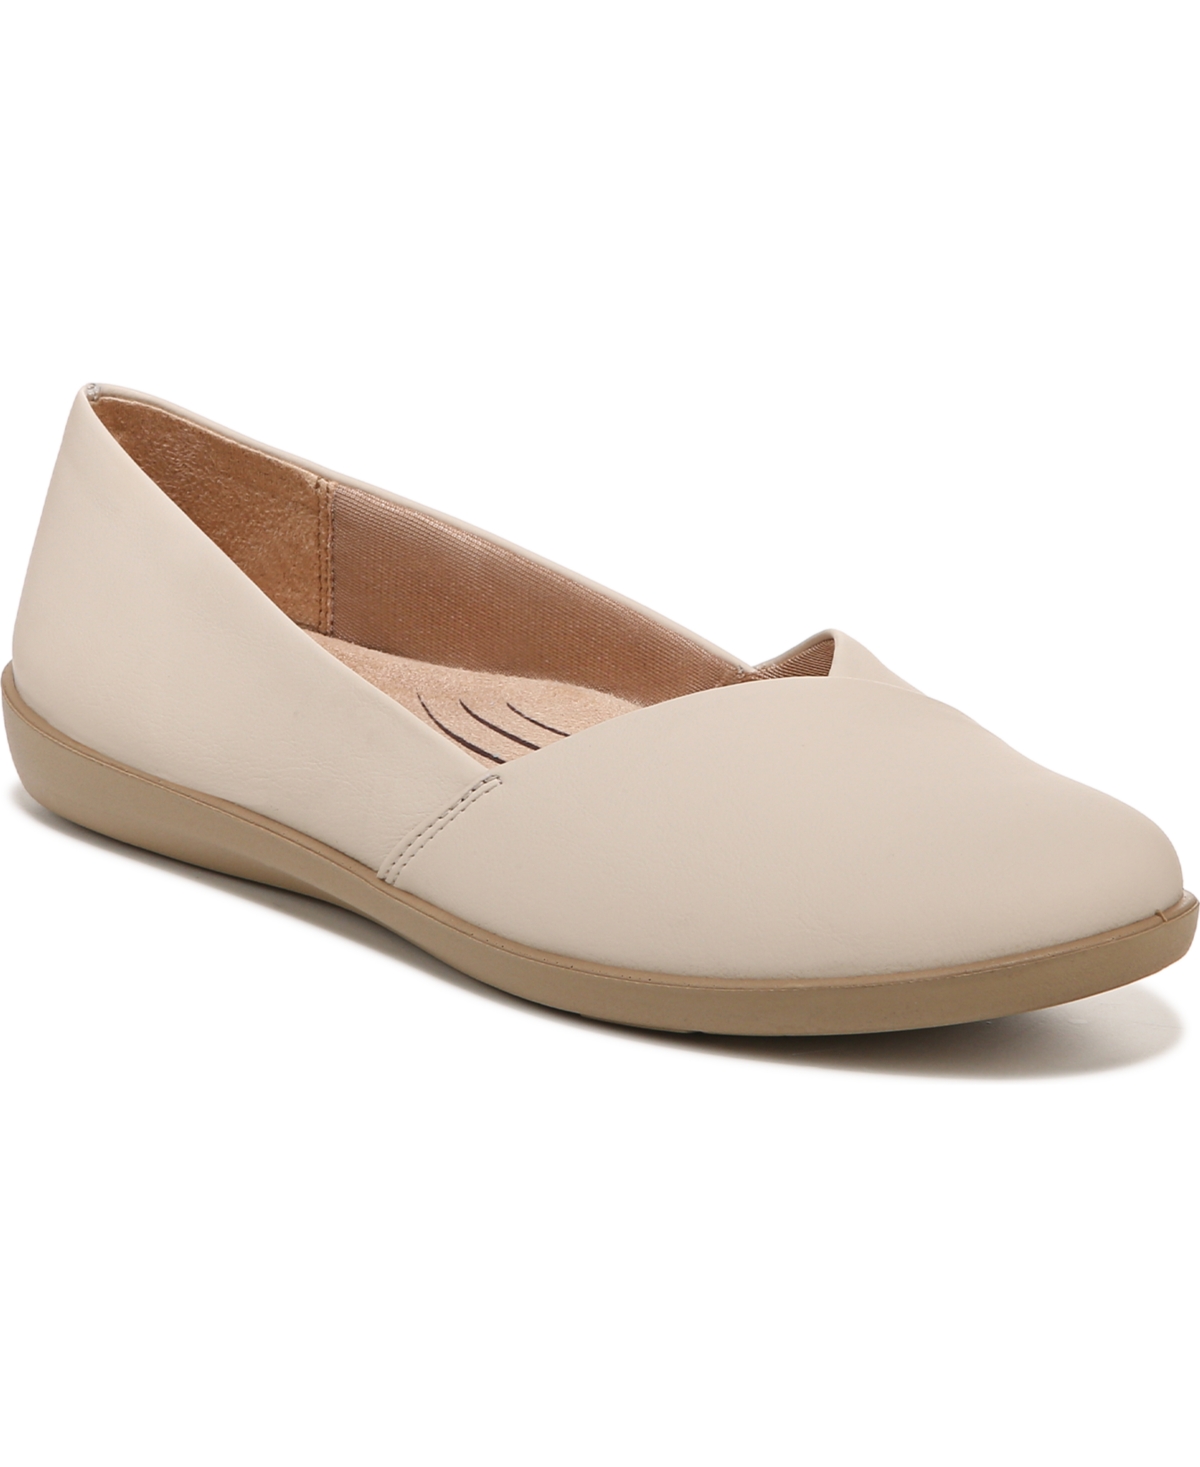 Notorious Flats - Tan Faux Leather